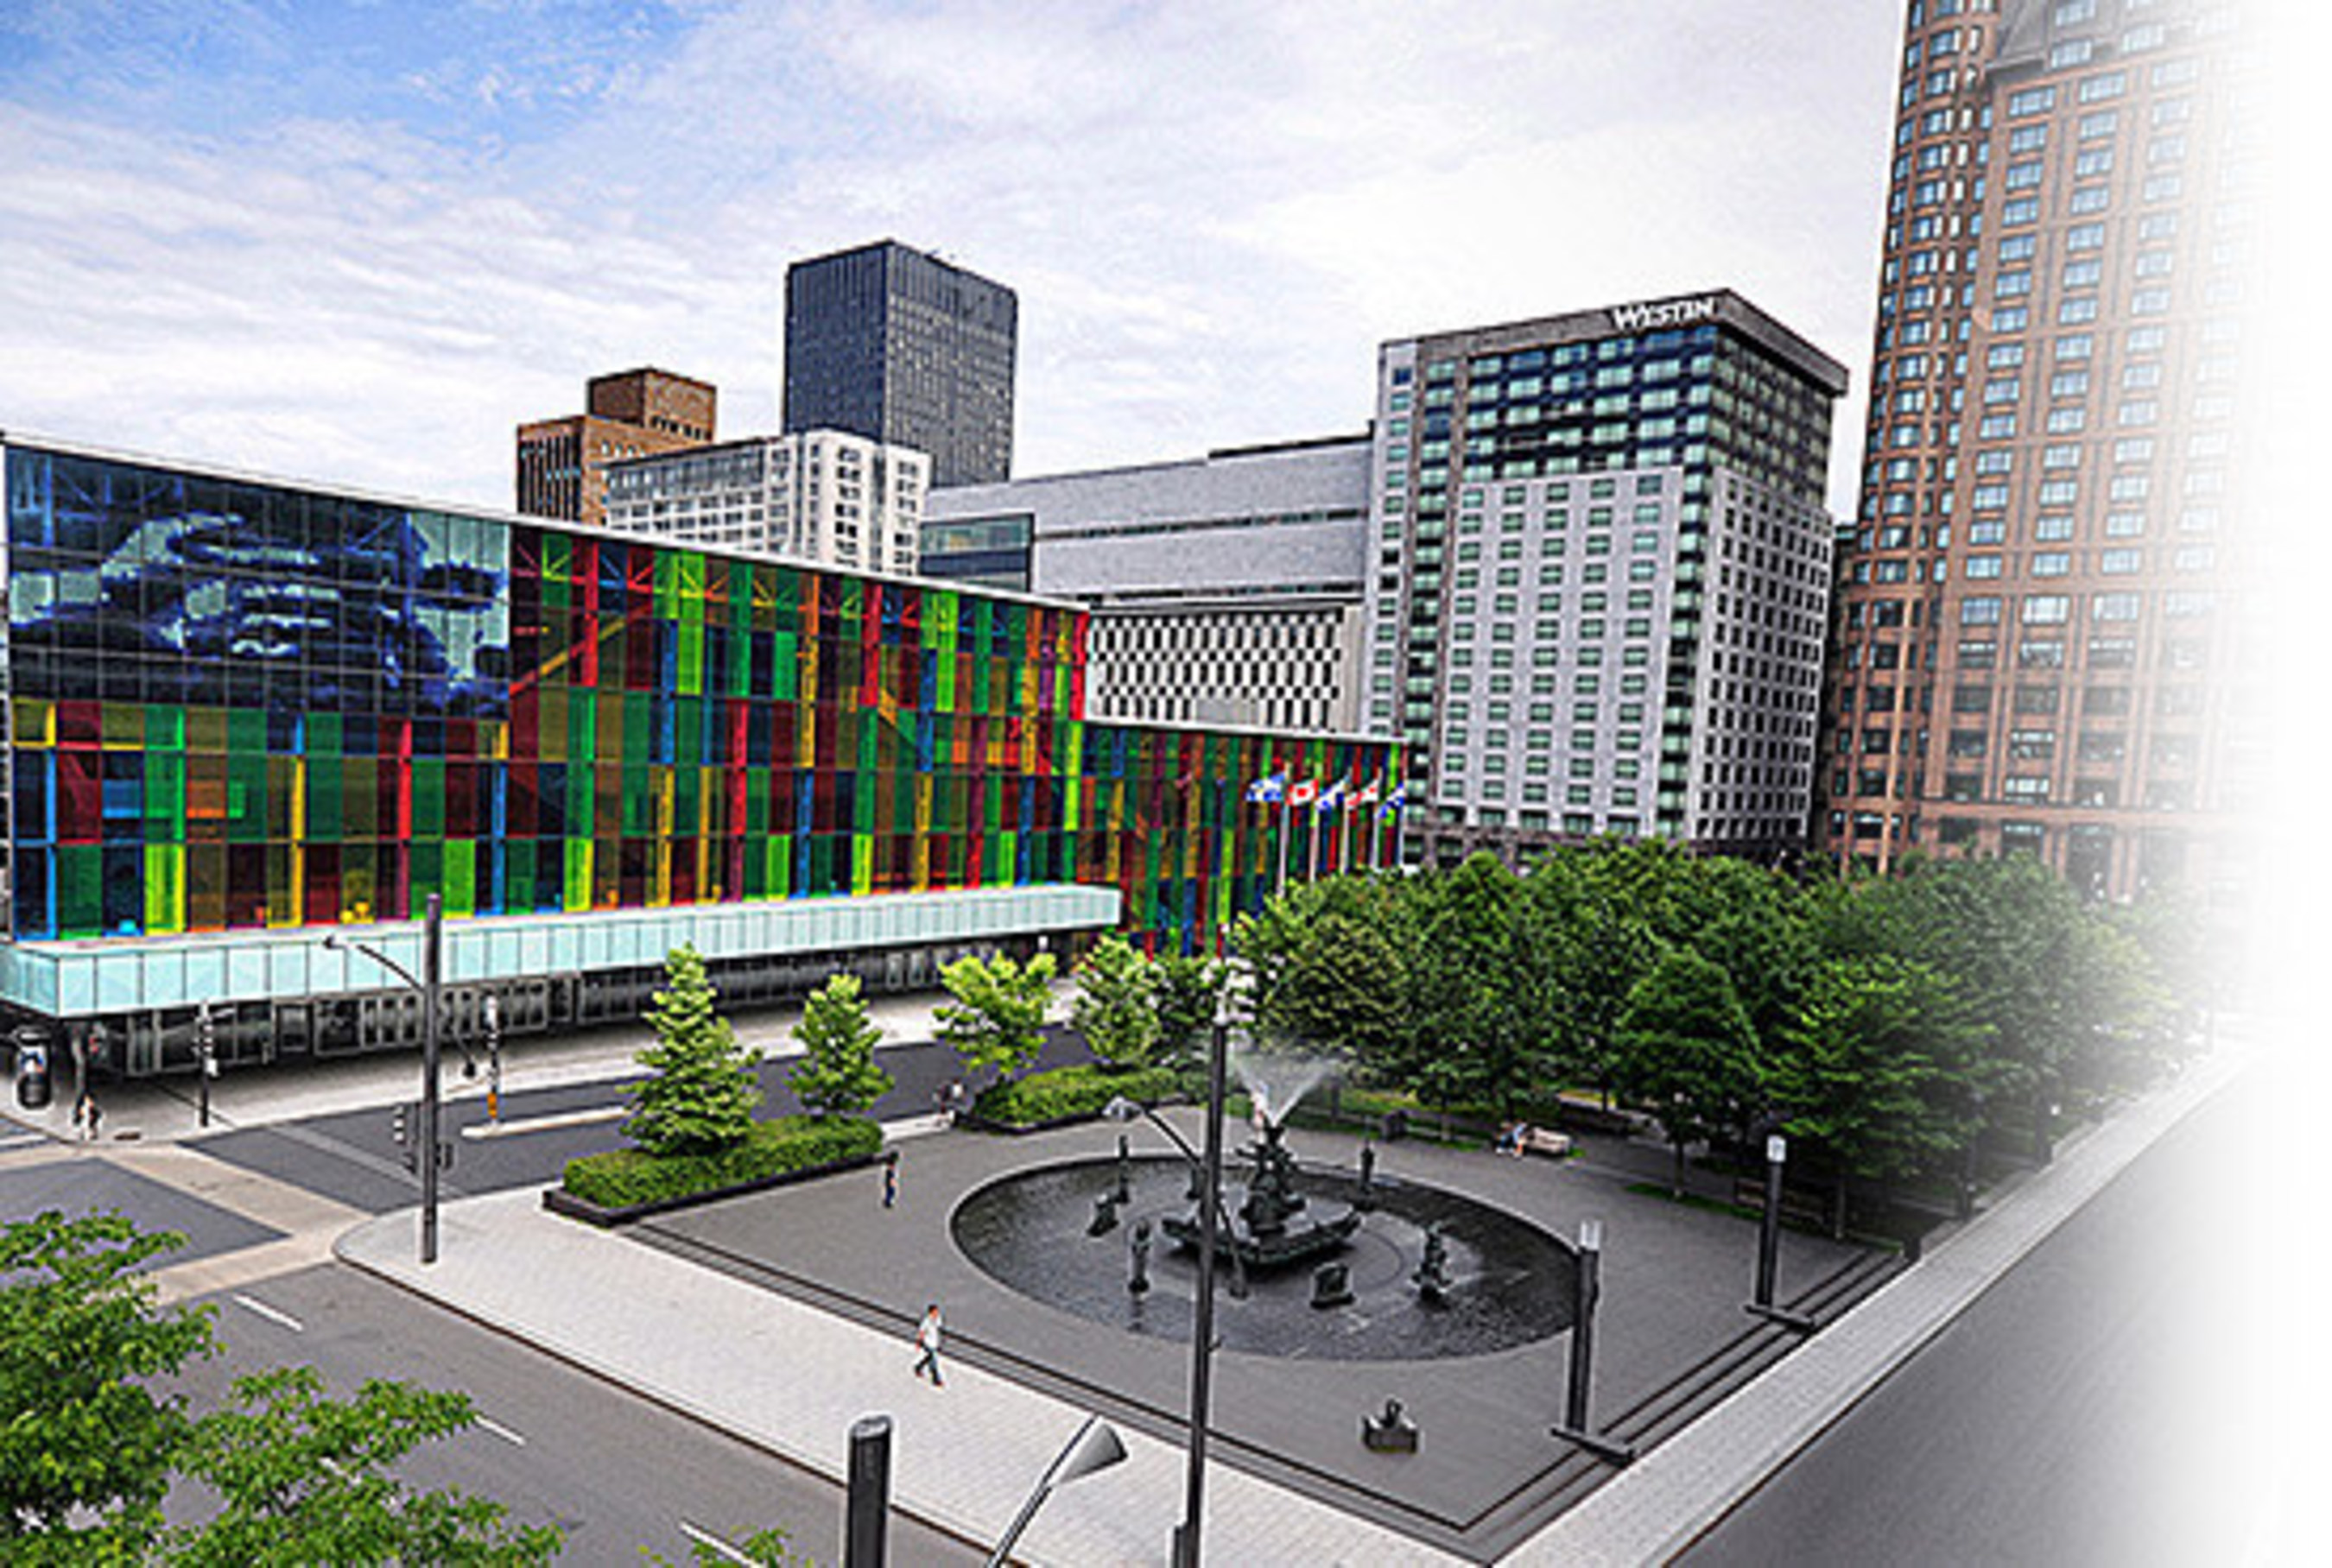 Thousands of engineers and executives to gather at Palais des Congres in Montreal, November 19-20, 2014.